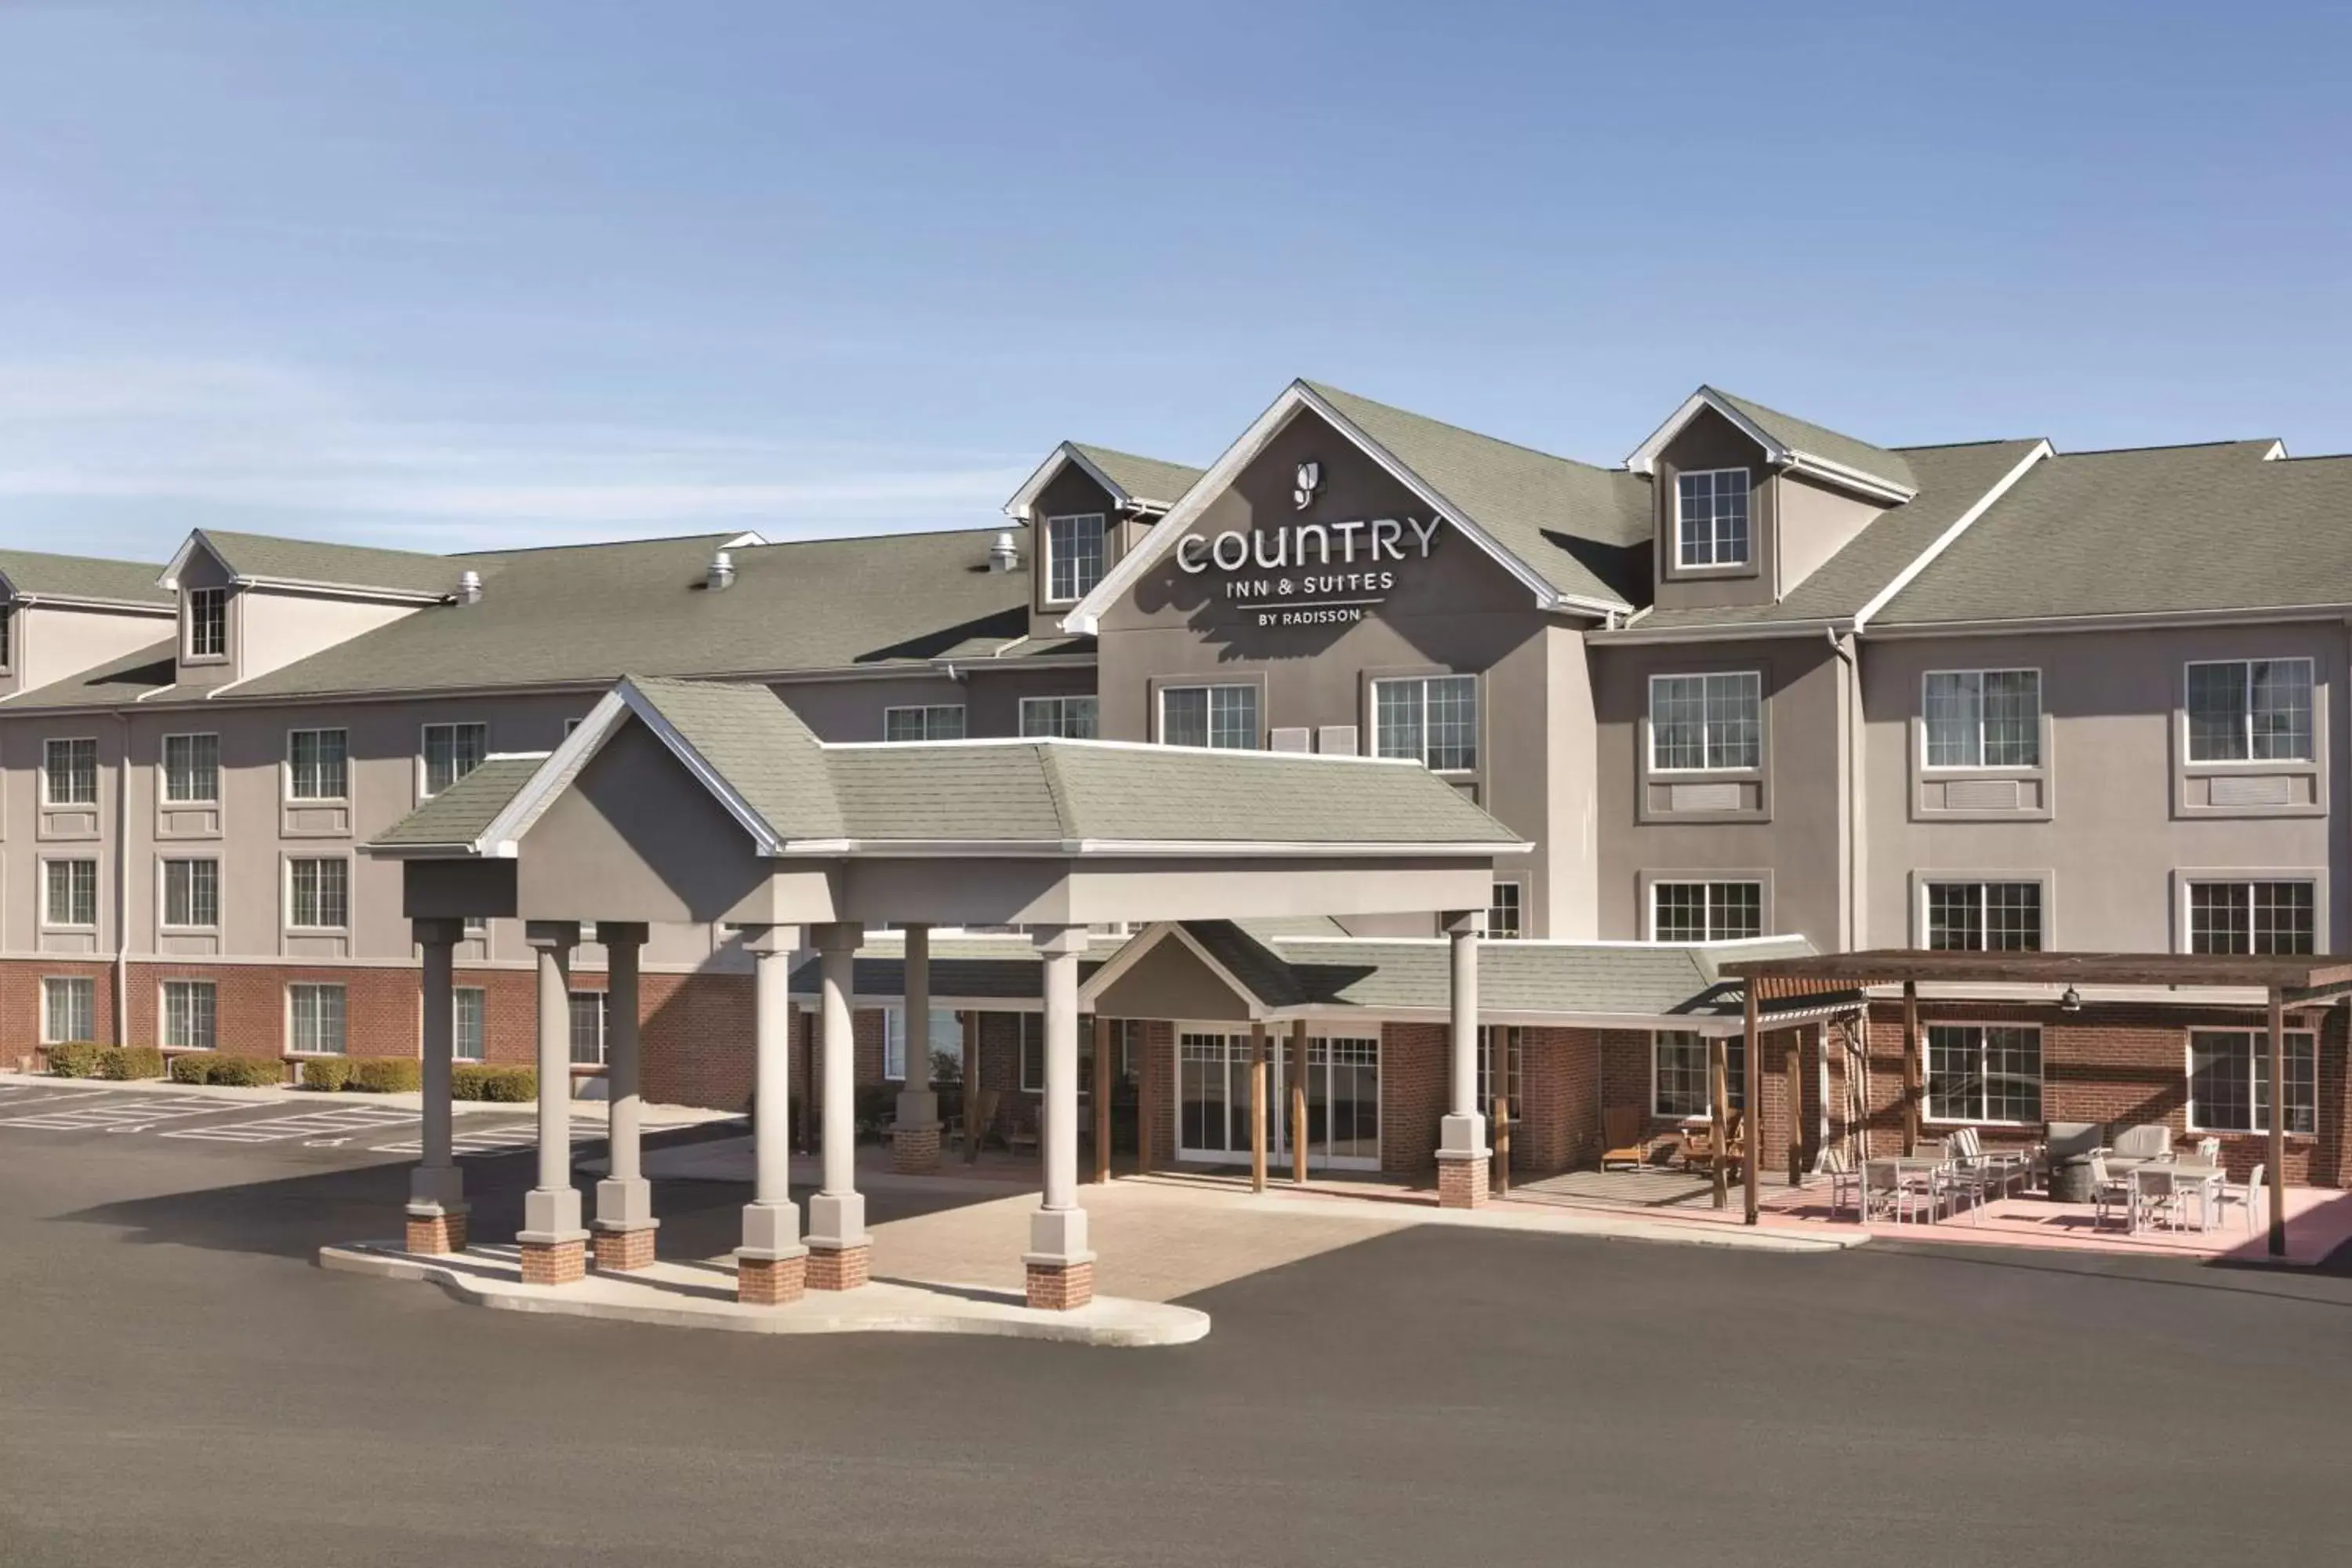 Property building in Country Inn & Suites by Radisson London, Kentucky